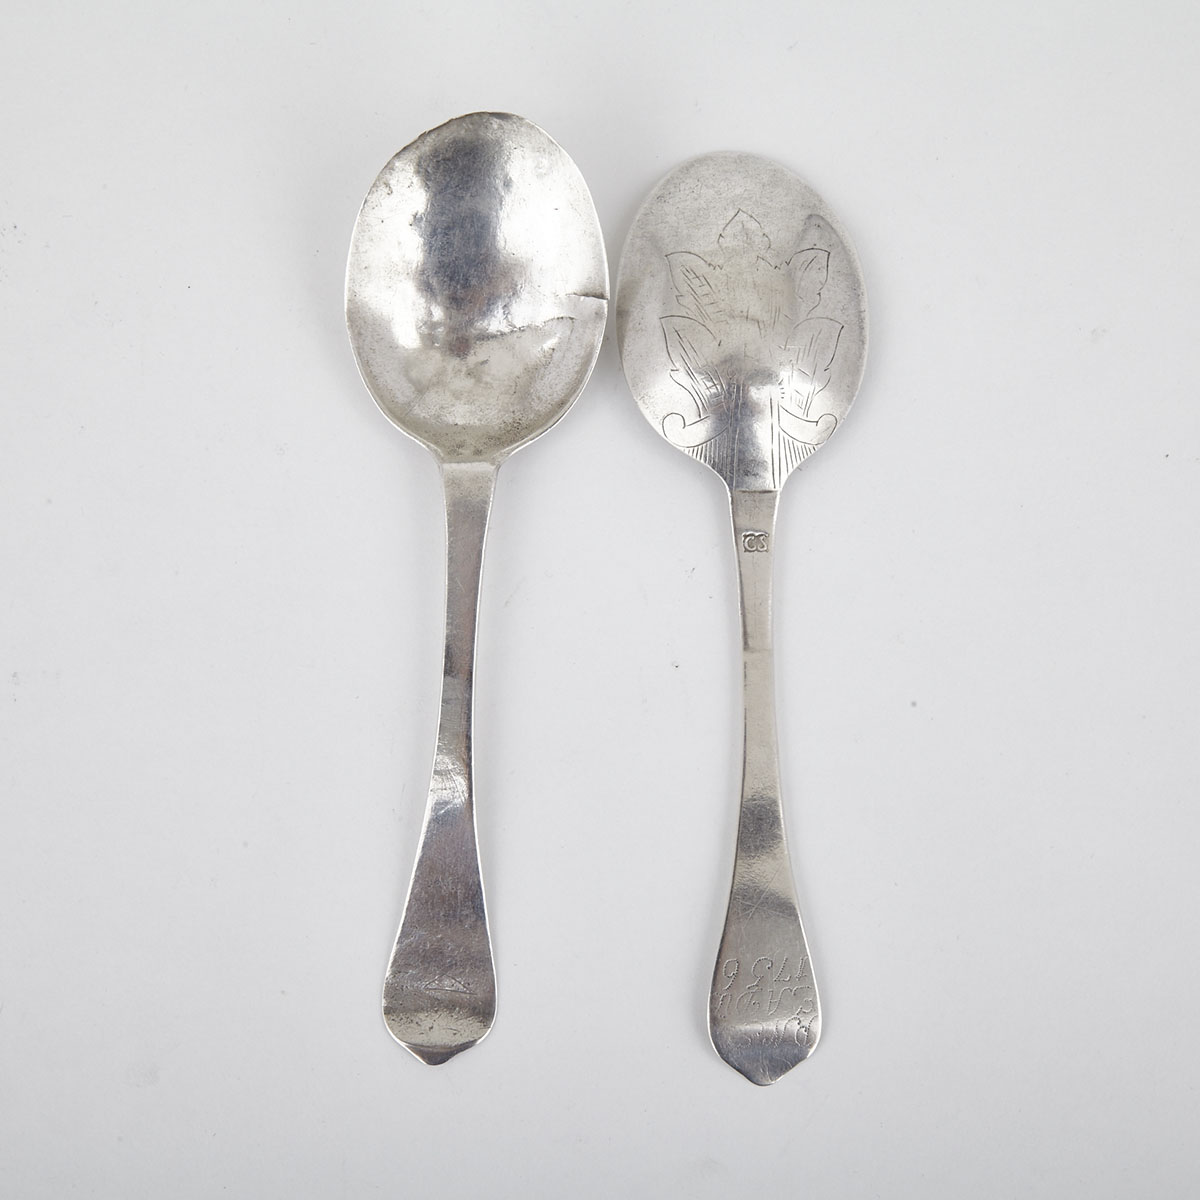 Pair of Continental Silver Dog-Nose Spoons, c.1700